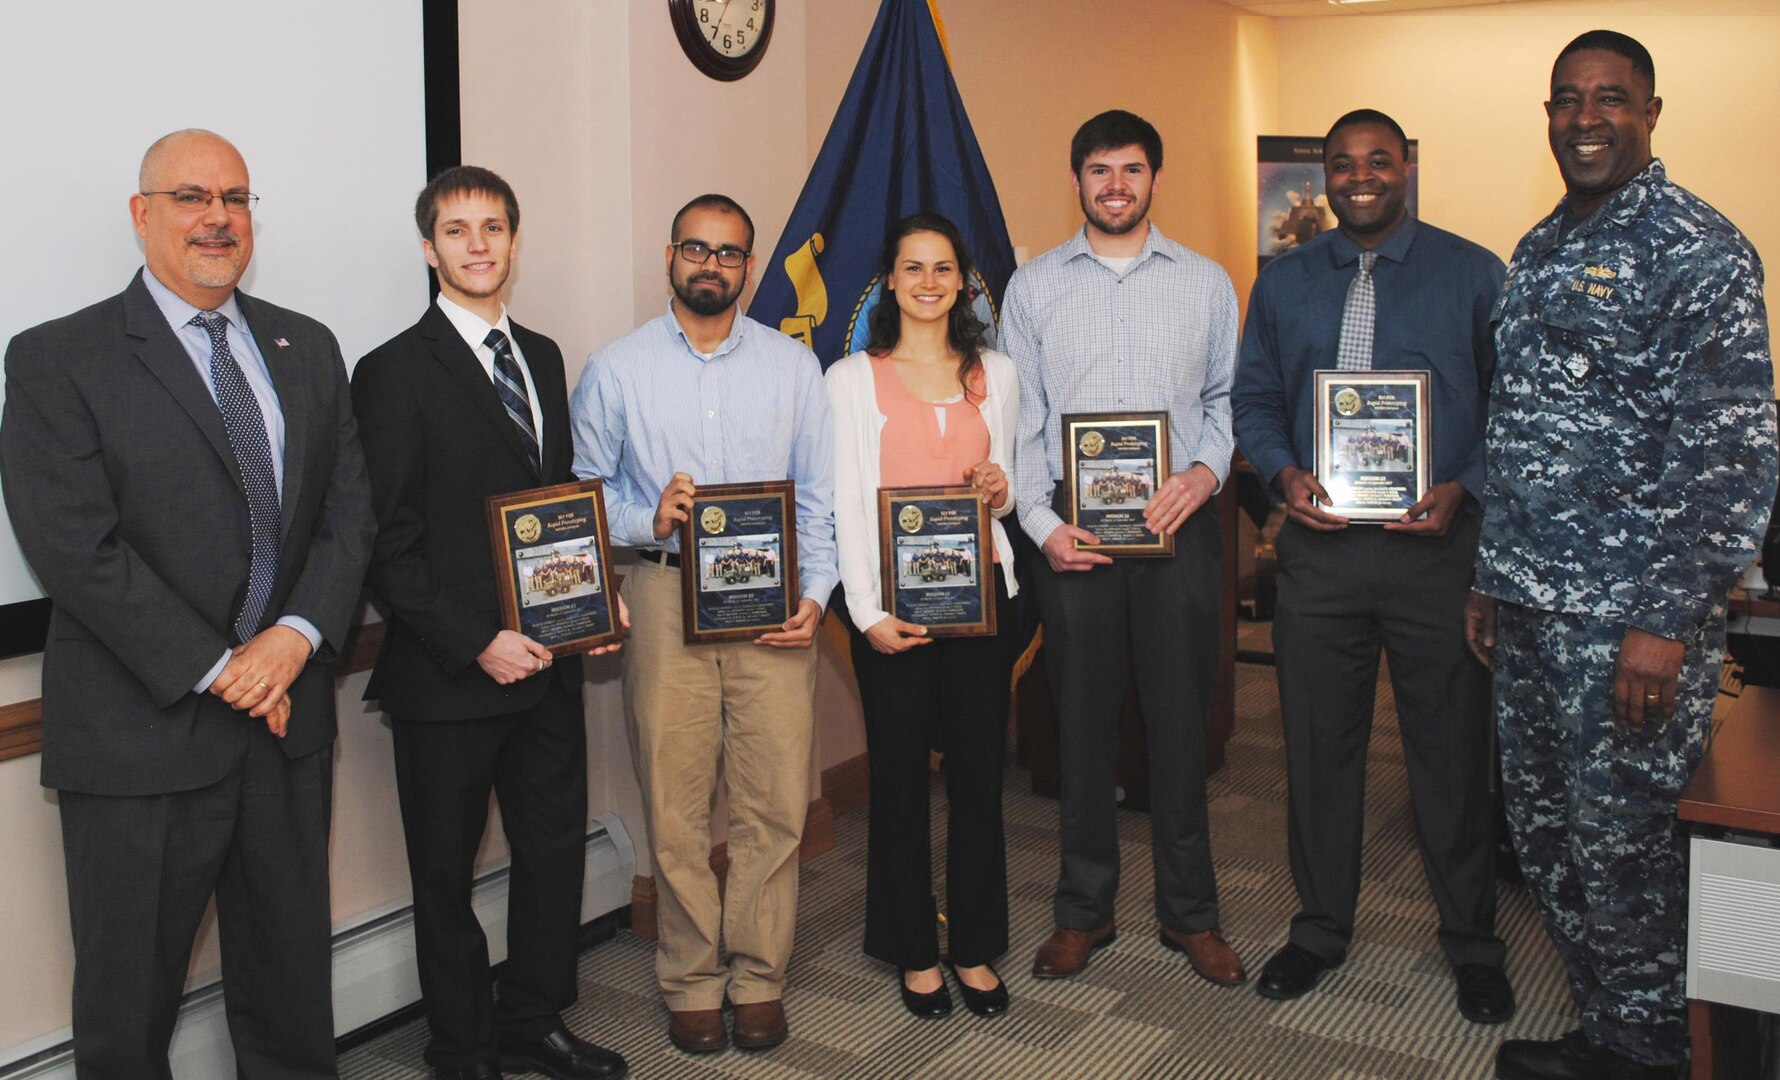 IMAGE: DAHLGREN, Va. (Feb. 26, 2018) - Five members of the Naval Surface Warfare Center Dahlgren Division (NSWCDD) Sly Fox Mission 22 team - Michael Parkison, Jamshaid Chaudhry, Michelle Craft, Joseph Gills, and Allen Woods - hold the Sly Fox Awards they received from NSWCDD Commanding Officer Capt. Godfrey 'Gus' Weekes and NSWCDD Technical Director John Fiore at the command's leadership meeting. They were among seven Sly Fox Mission 22 members honored for developing a rapid prototyping technology called the Collaborative Aerial Network for the Autonomous Remote Engagement System (CANARES) - fully integrated with an unmanned aerial vehicle (UAV), an unmanned ground vehicle, and a command and control station. The unmanned vehicle - dubbed the Weaponized Autonomous System Prototype (WASP) - was integrated by the team with a UAV to provide an aerial perspective for increased situational awareness. Navy civilian and military personnel witnessed the Mission 22 demonstration of CANARES as it quickly and effectively detected, tracked, and engaged target after target on the Potomac River Test Range at a September demonstration. For more news and information on CANARES technology and its demonstration, the full story - U.S. Navy Mission 22 Team Develops 'Game Changing' Unmanned Capability - is available via this link: http://www.navsea.navy.mil/Media/News/Article/1369371/us-navy-mission-22-team-develops-game-changing-unmanned-capability.  (U.S. Navy photo by Bill Tremper/Released)